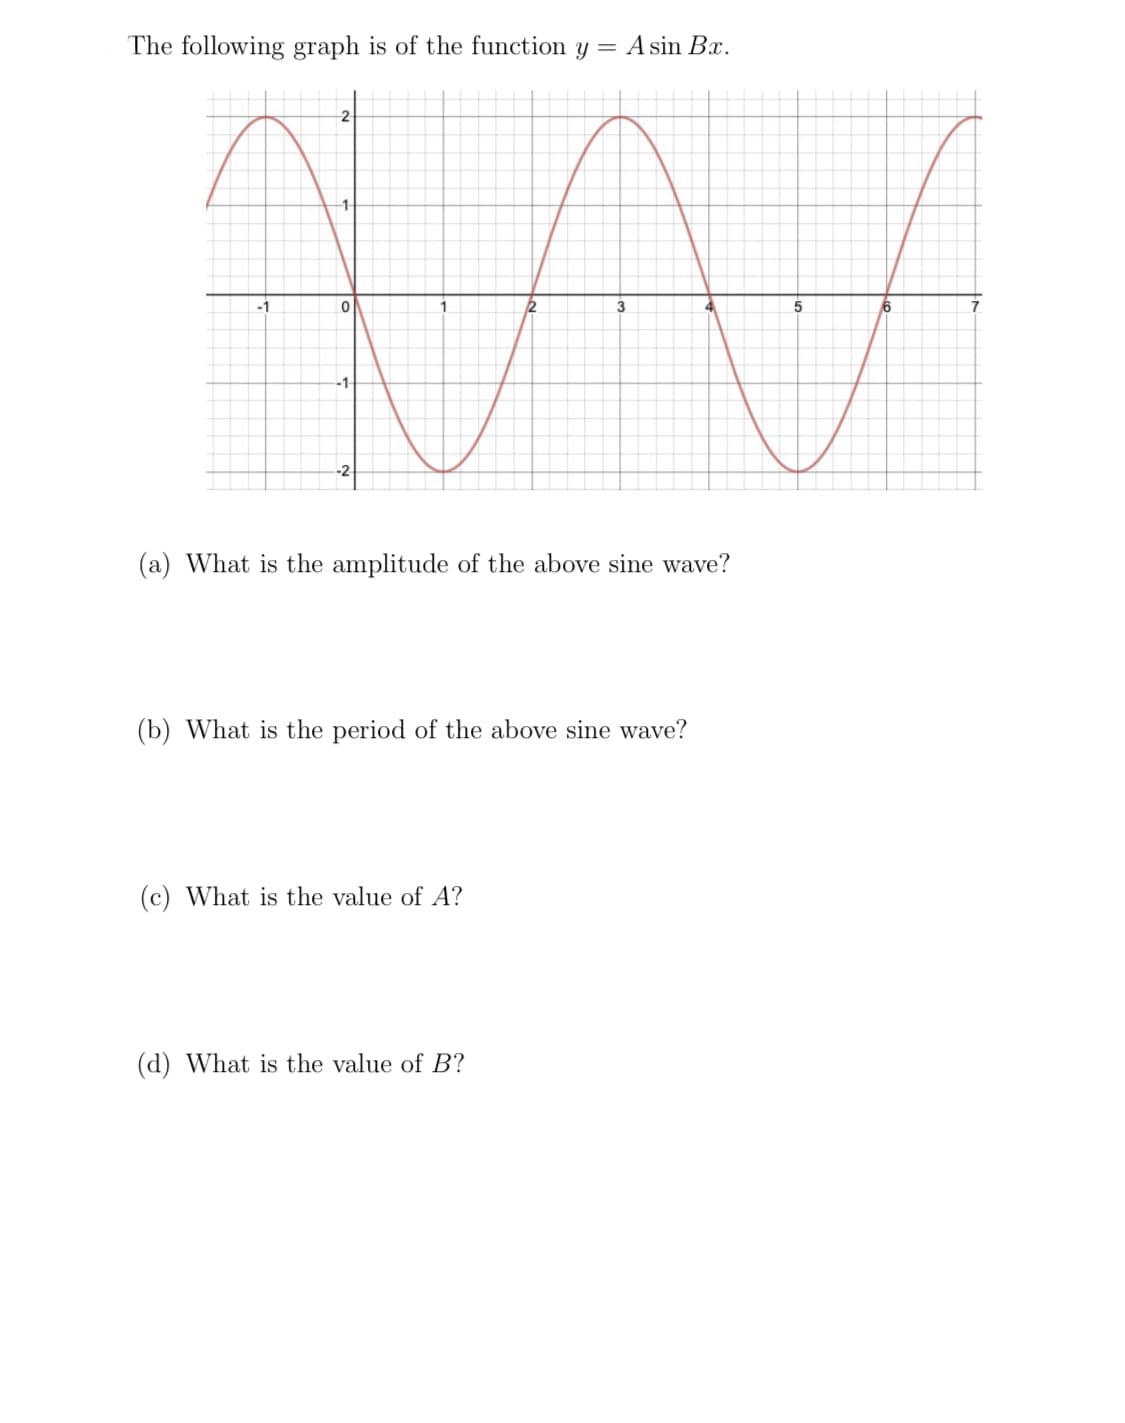 The following graph is of the function y = A sin Bx.
2
-1-
-1
1
-1
-2
(a) What is the amplitude of the above sine wave?
(b) What is the period of the above sine wave?
(c) What is the value of A?
(d) What is the value of B?
